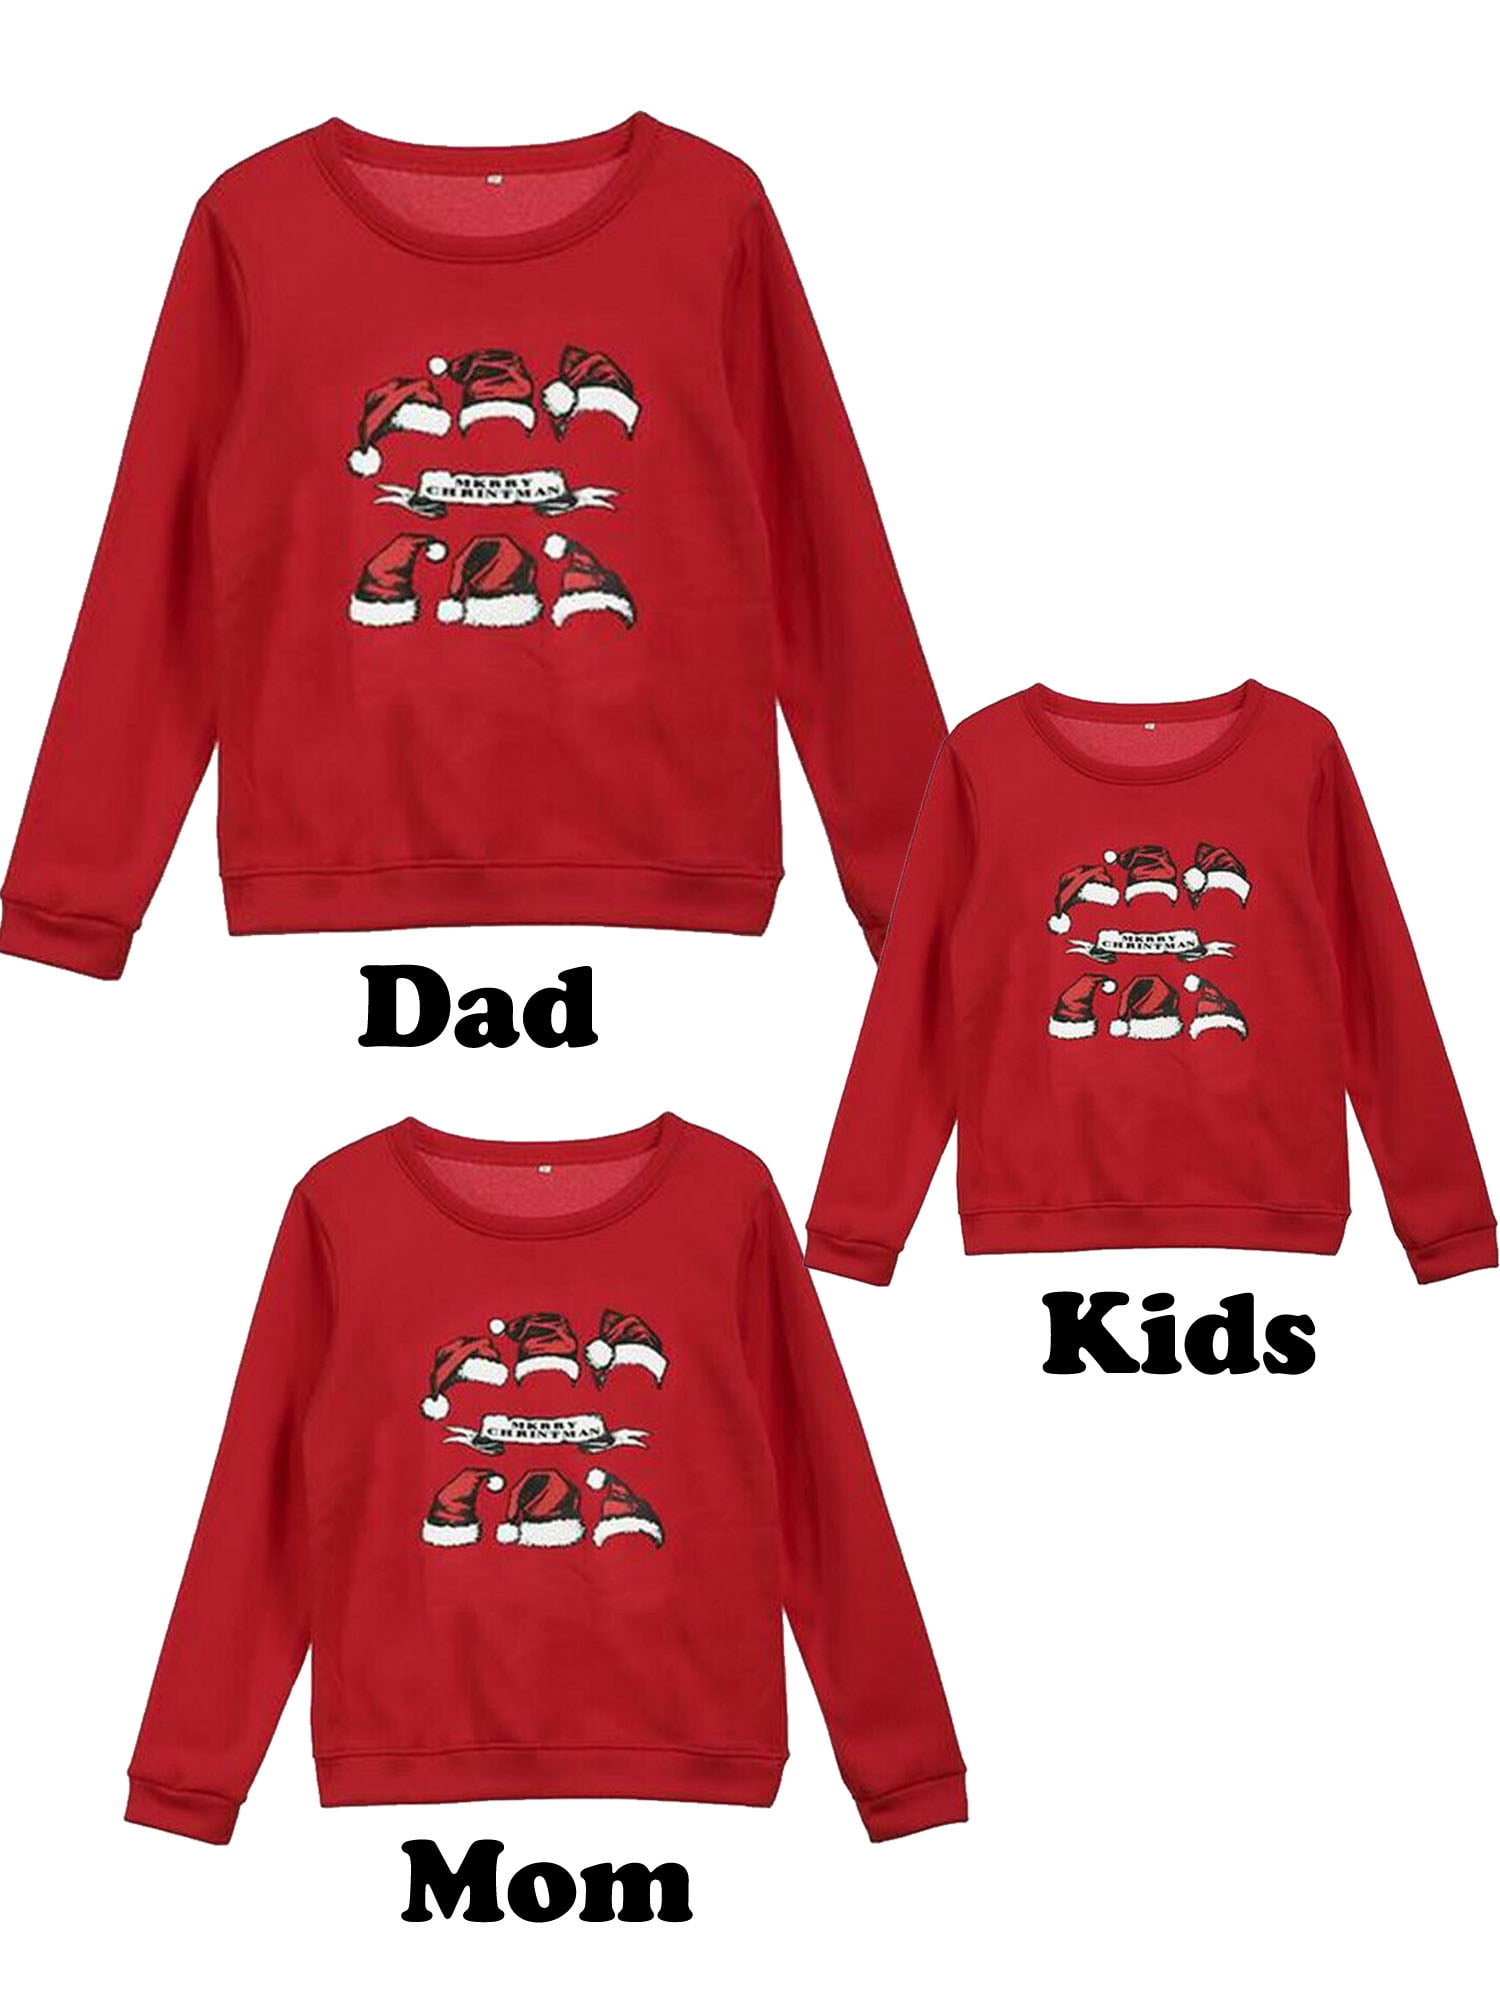 Mommy and Me Love Print Long Sleeve Pullover Tee Tops Family Matching Casual Sweatshirt T-Shirt Clothes Outfits